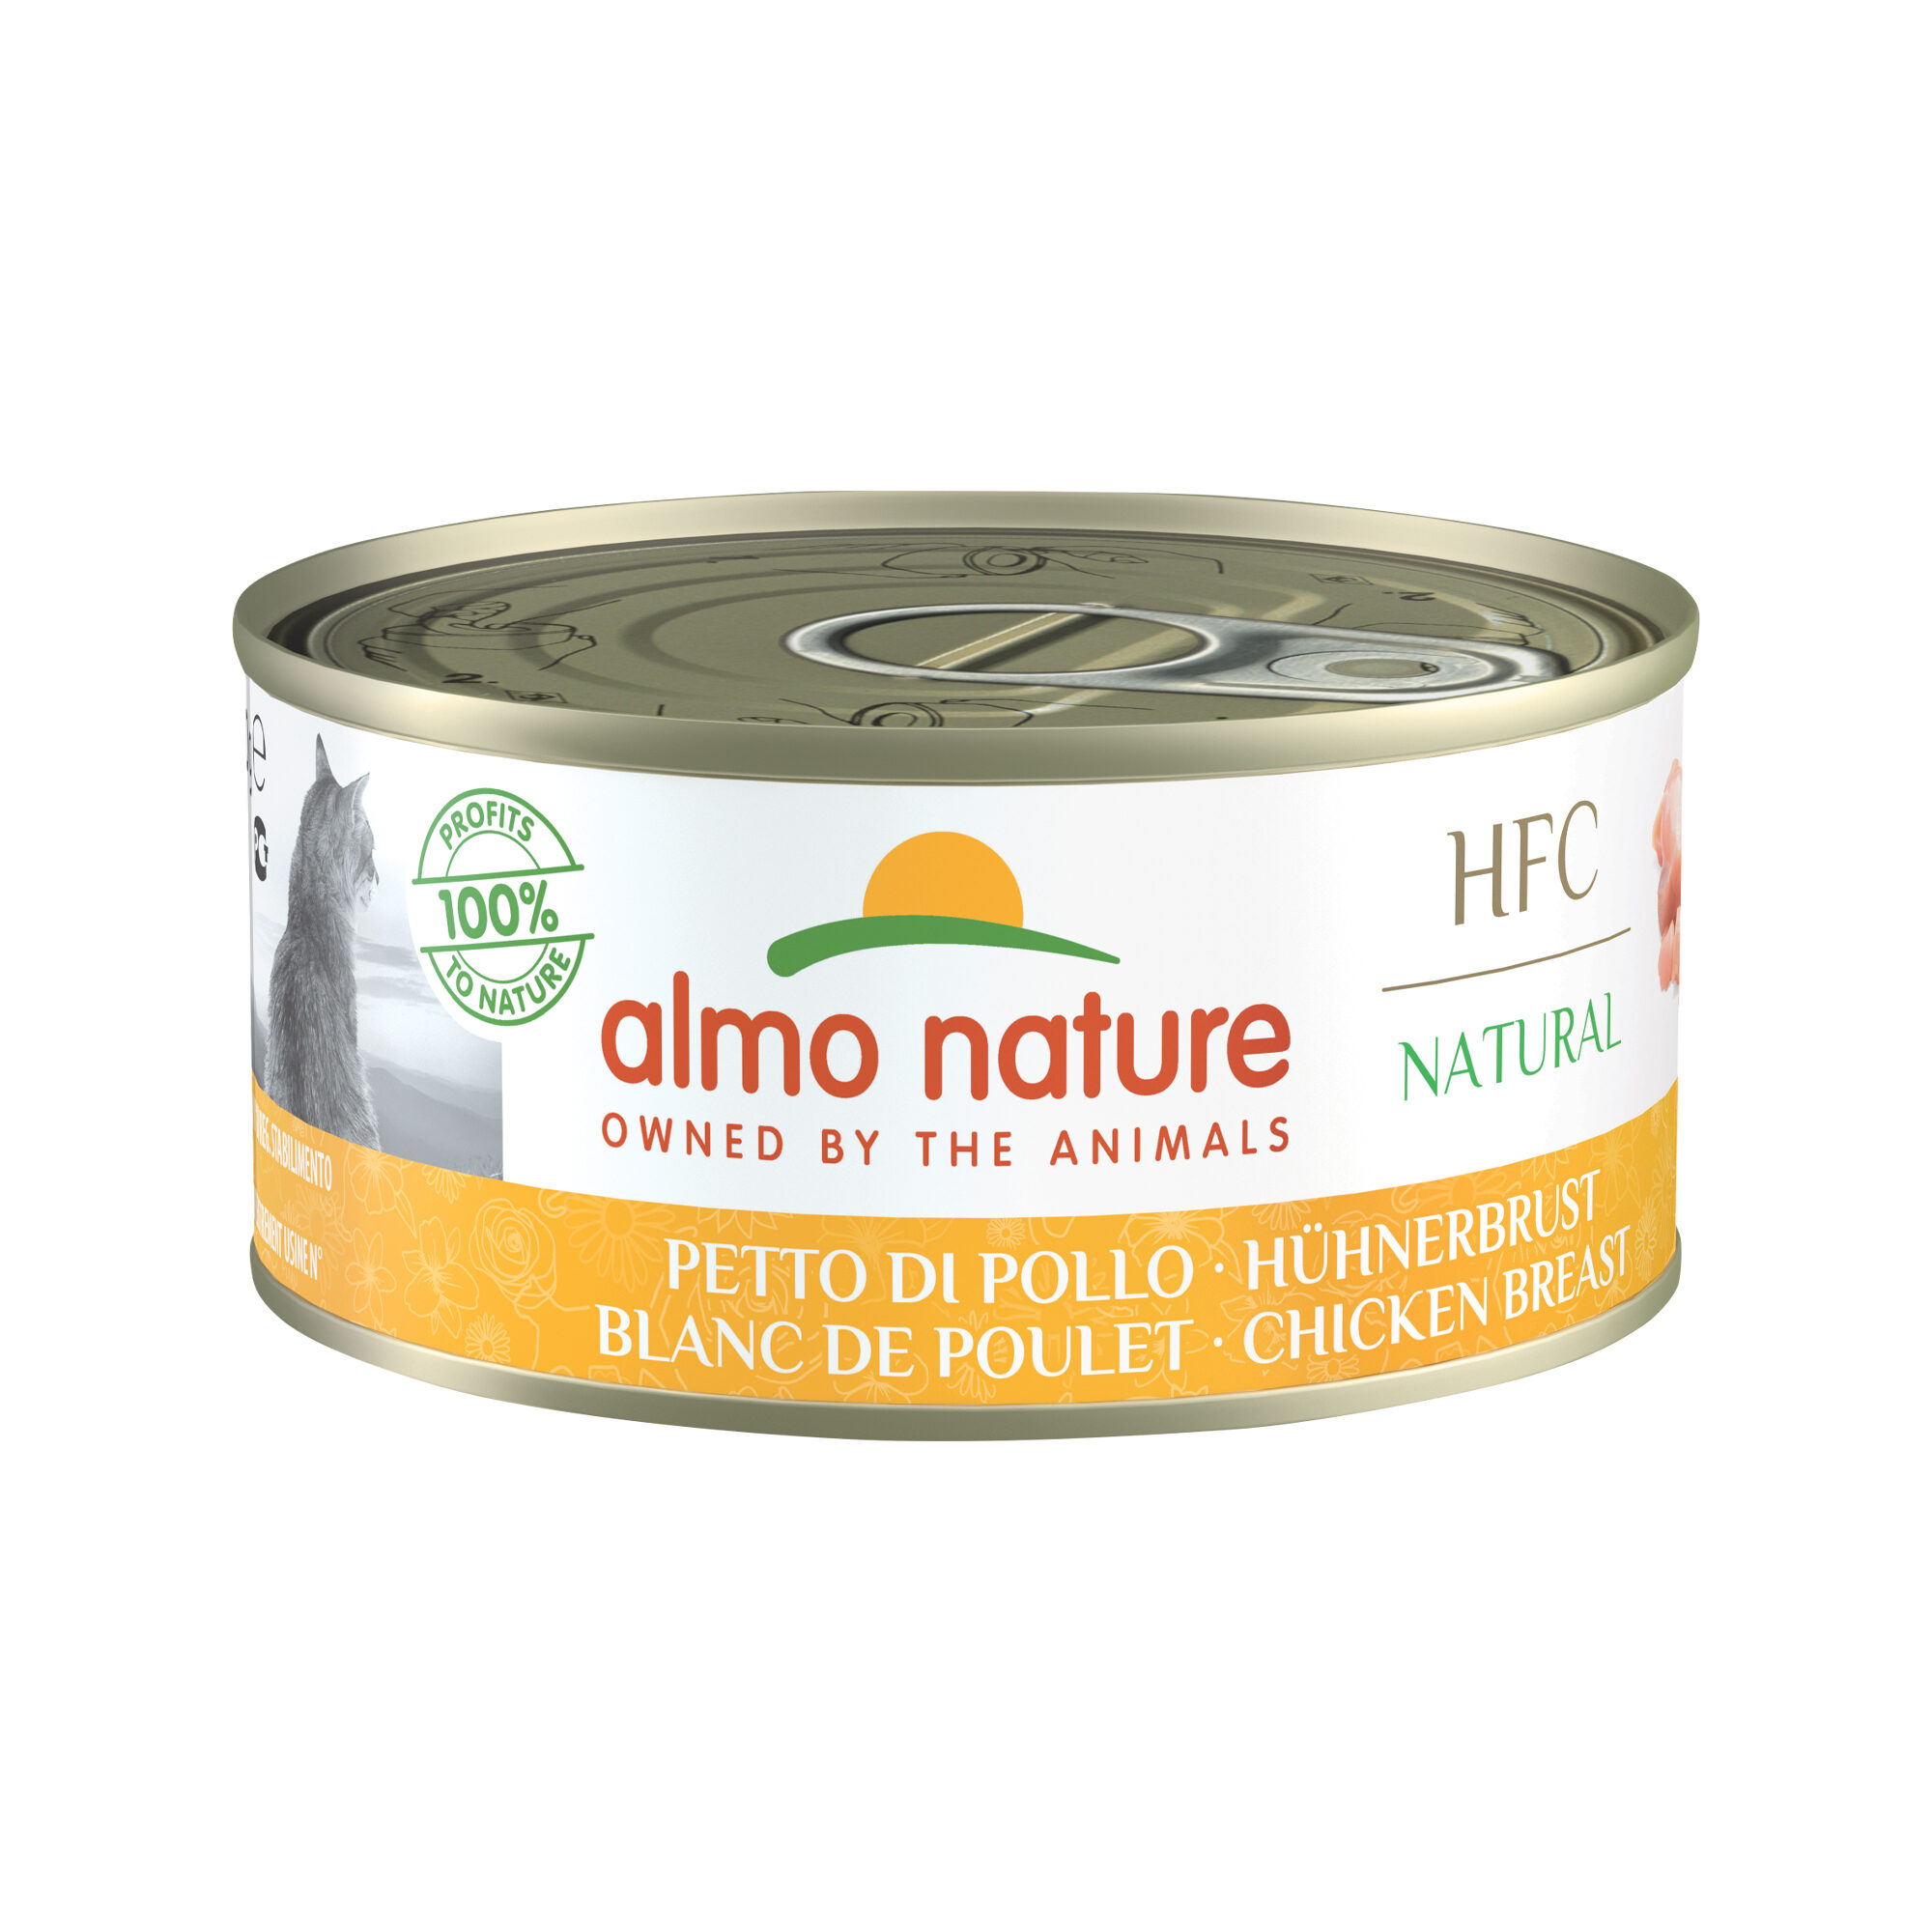 Almo Nature HFC Natural - Hühnerbrust - 24 x 150 g